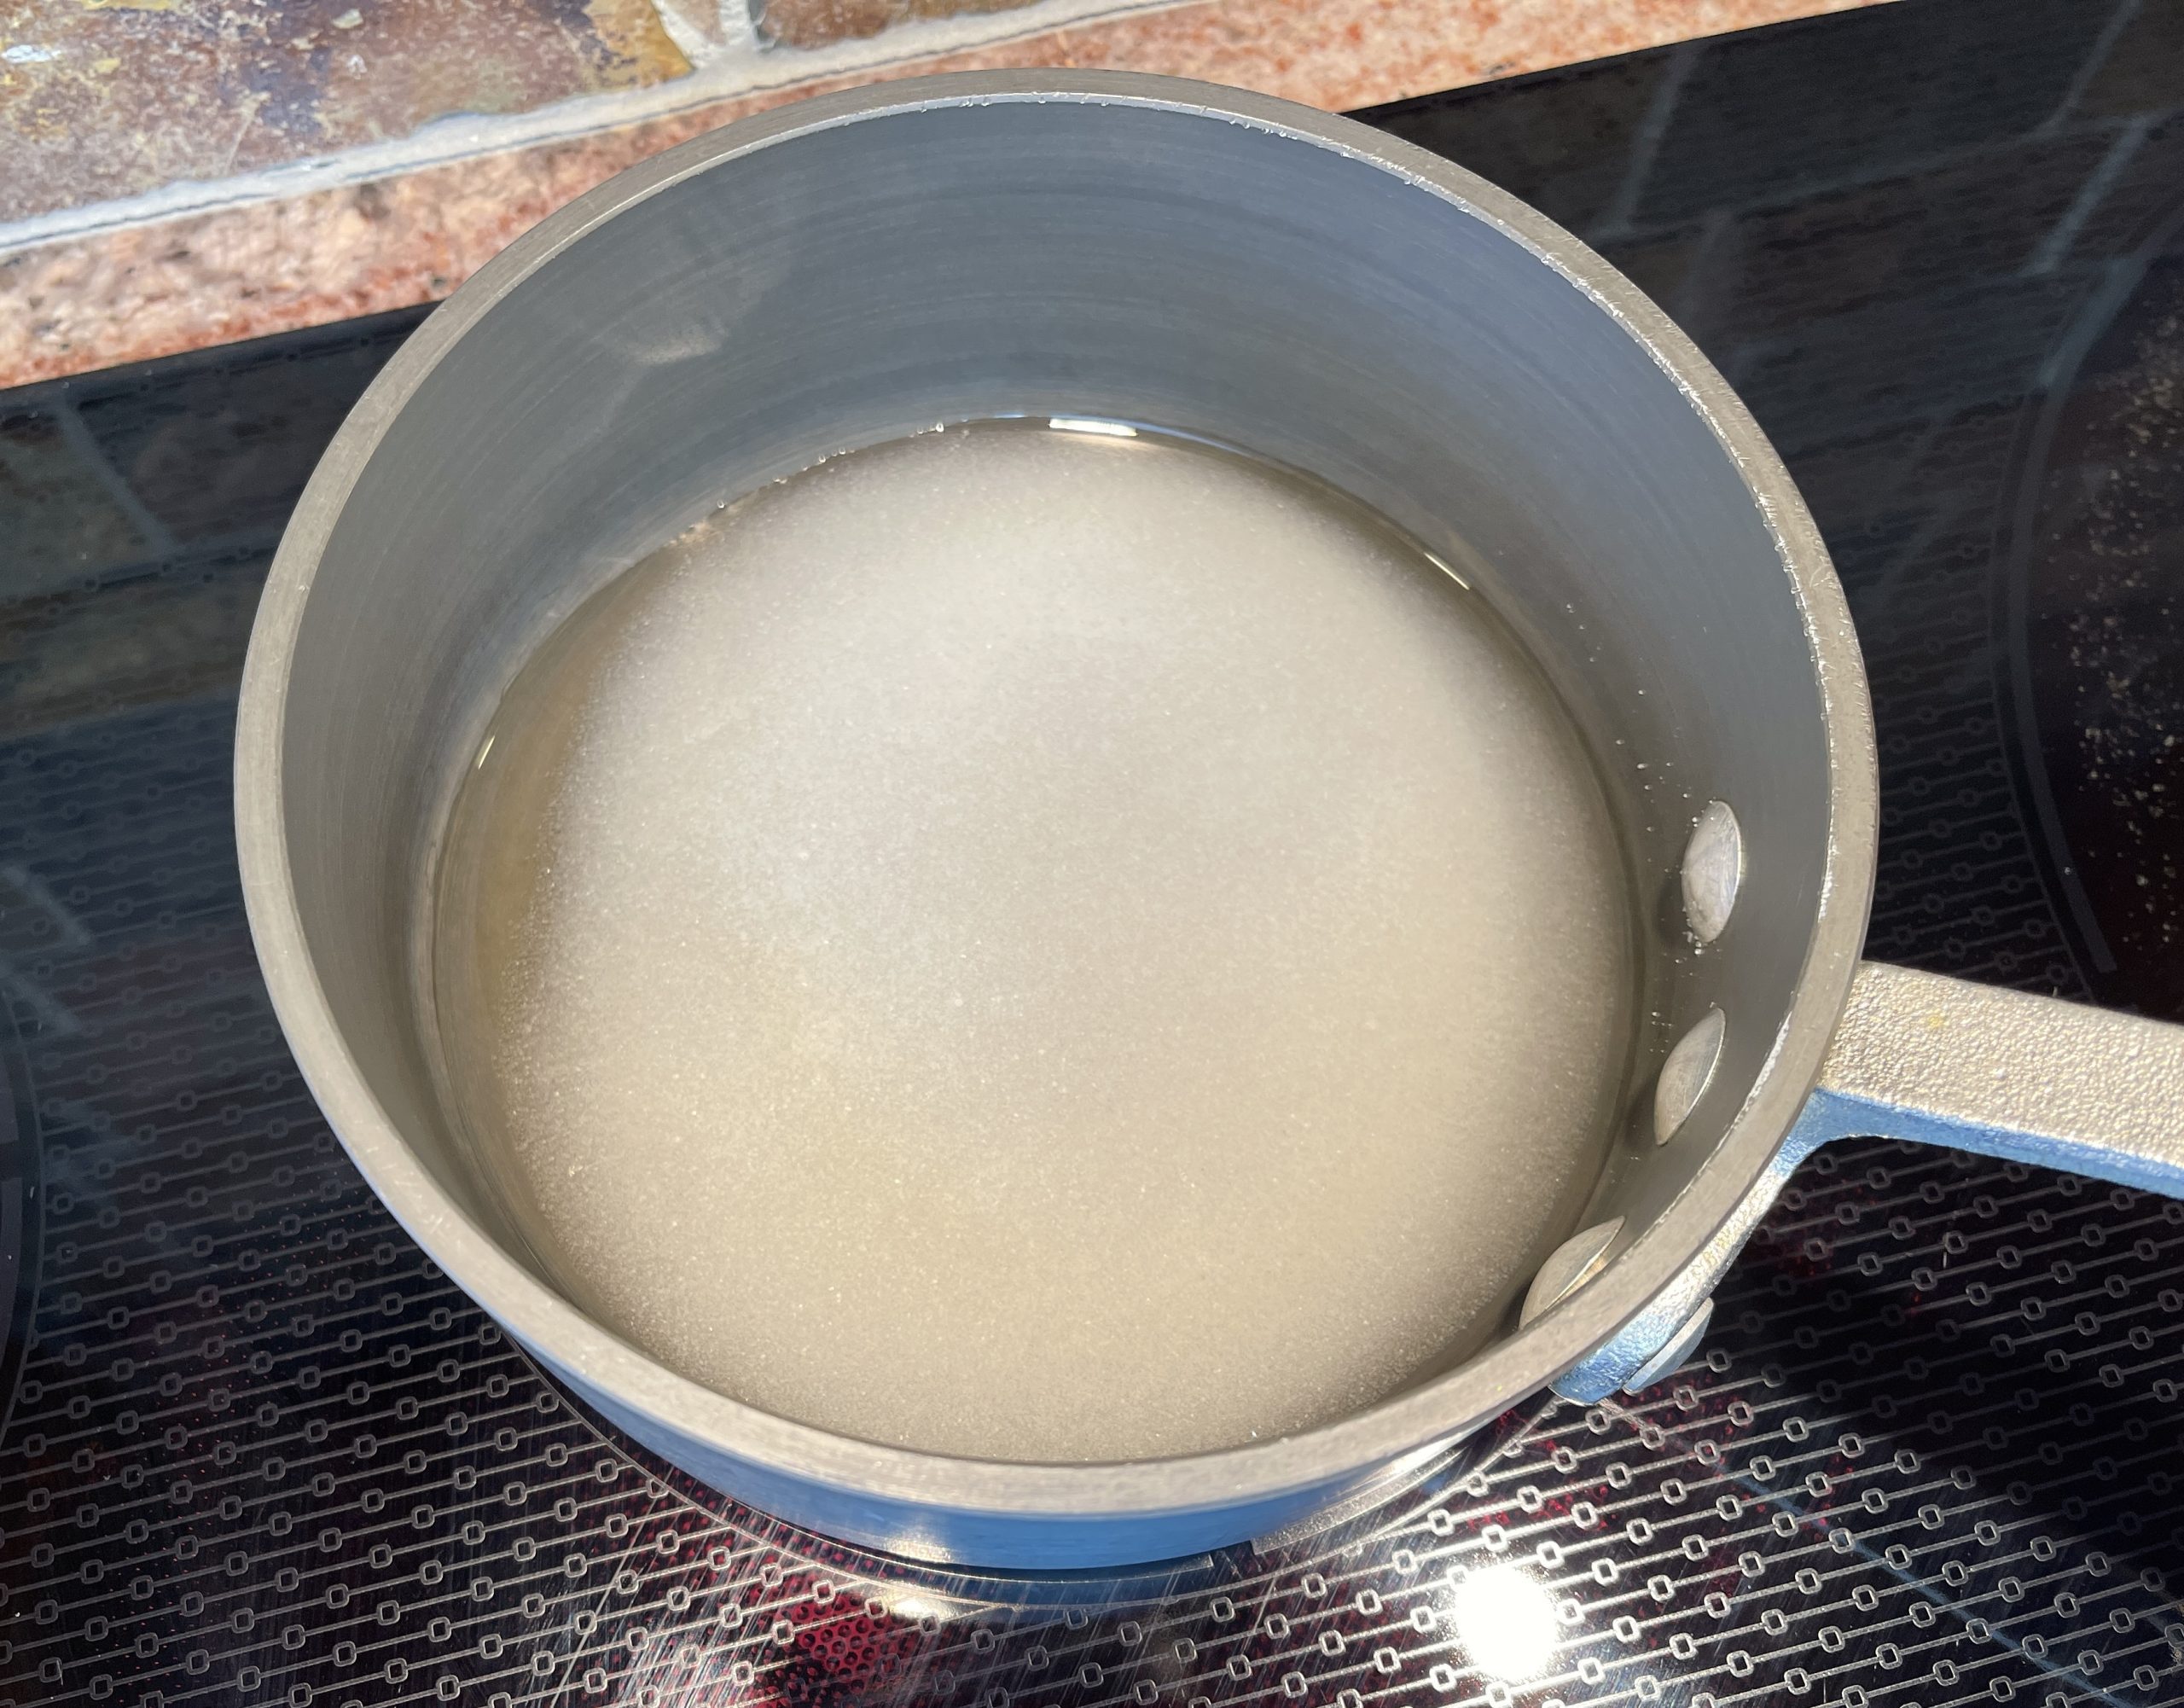 Combine sugar and water in a small saucepan